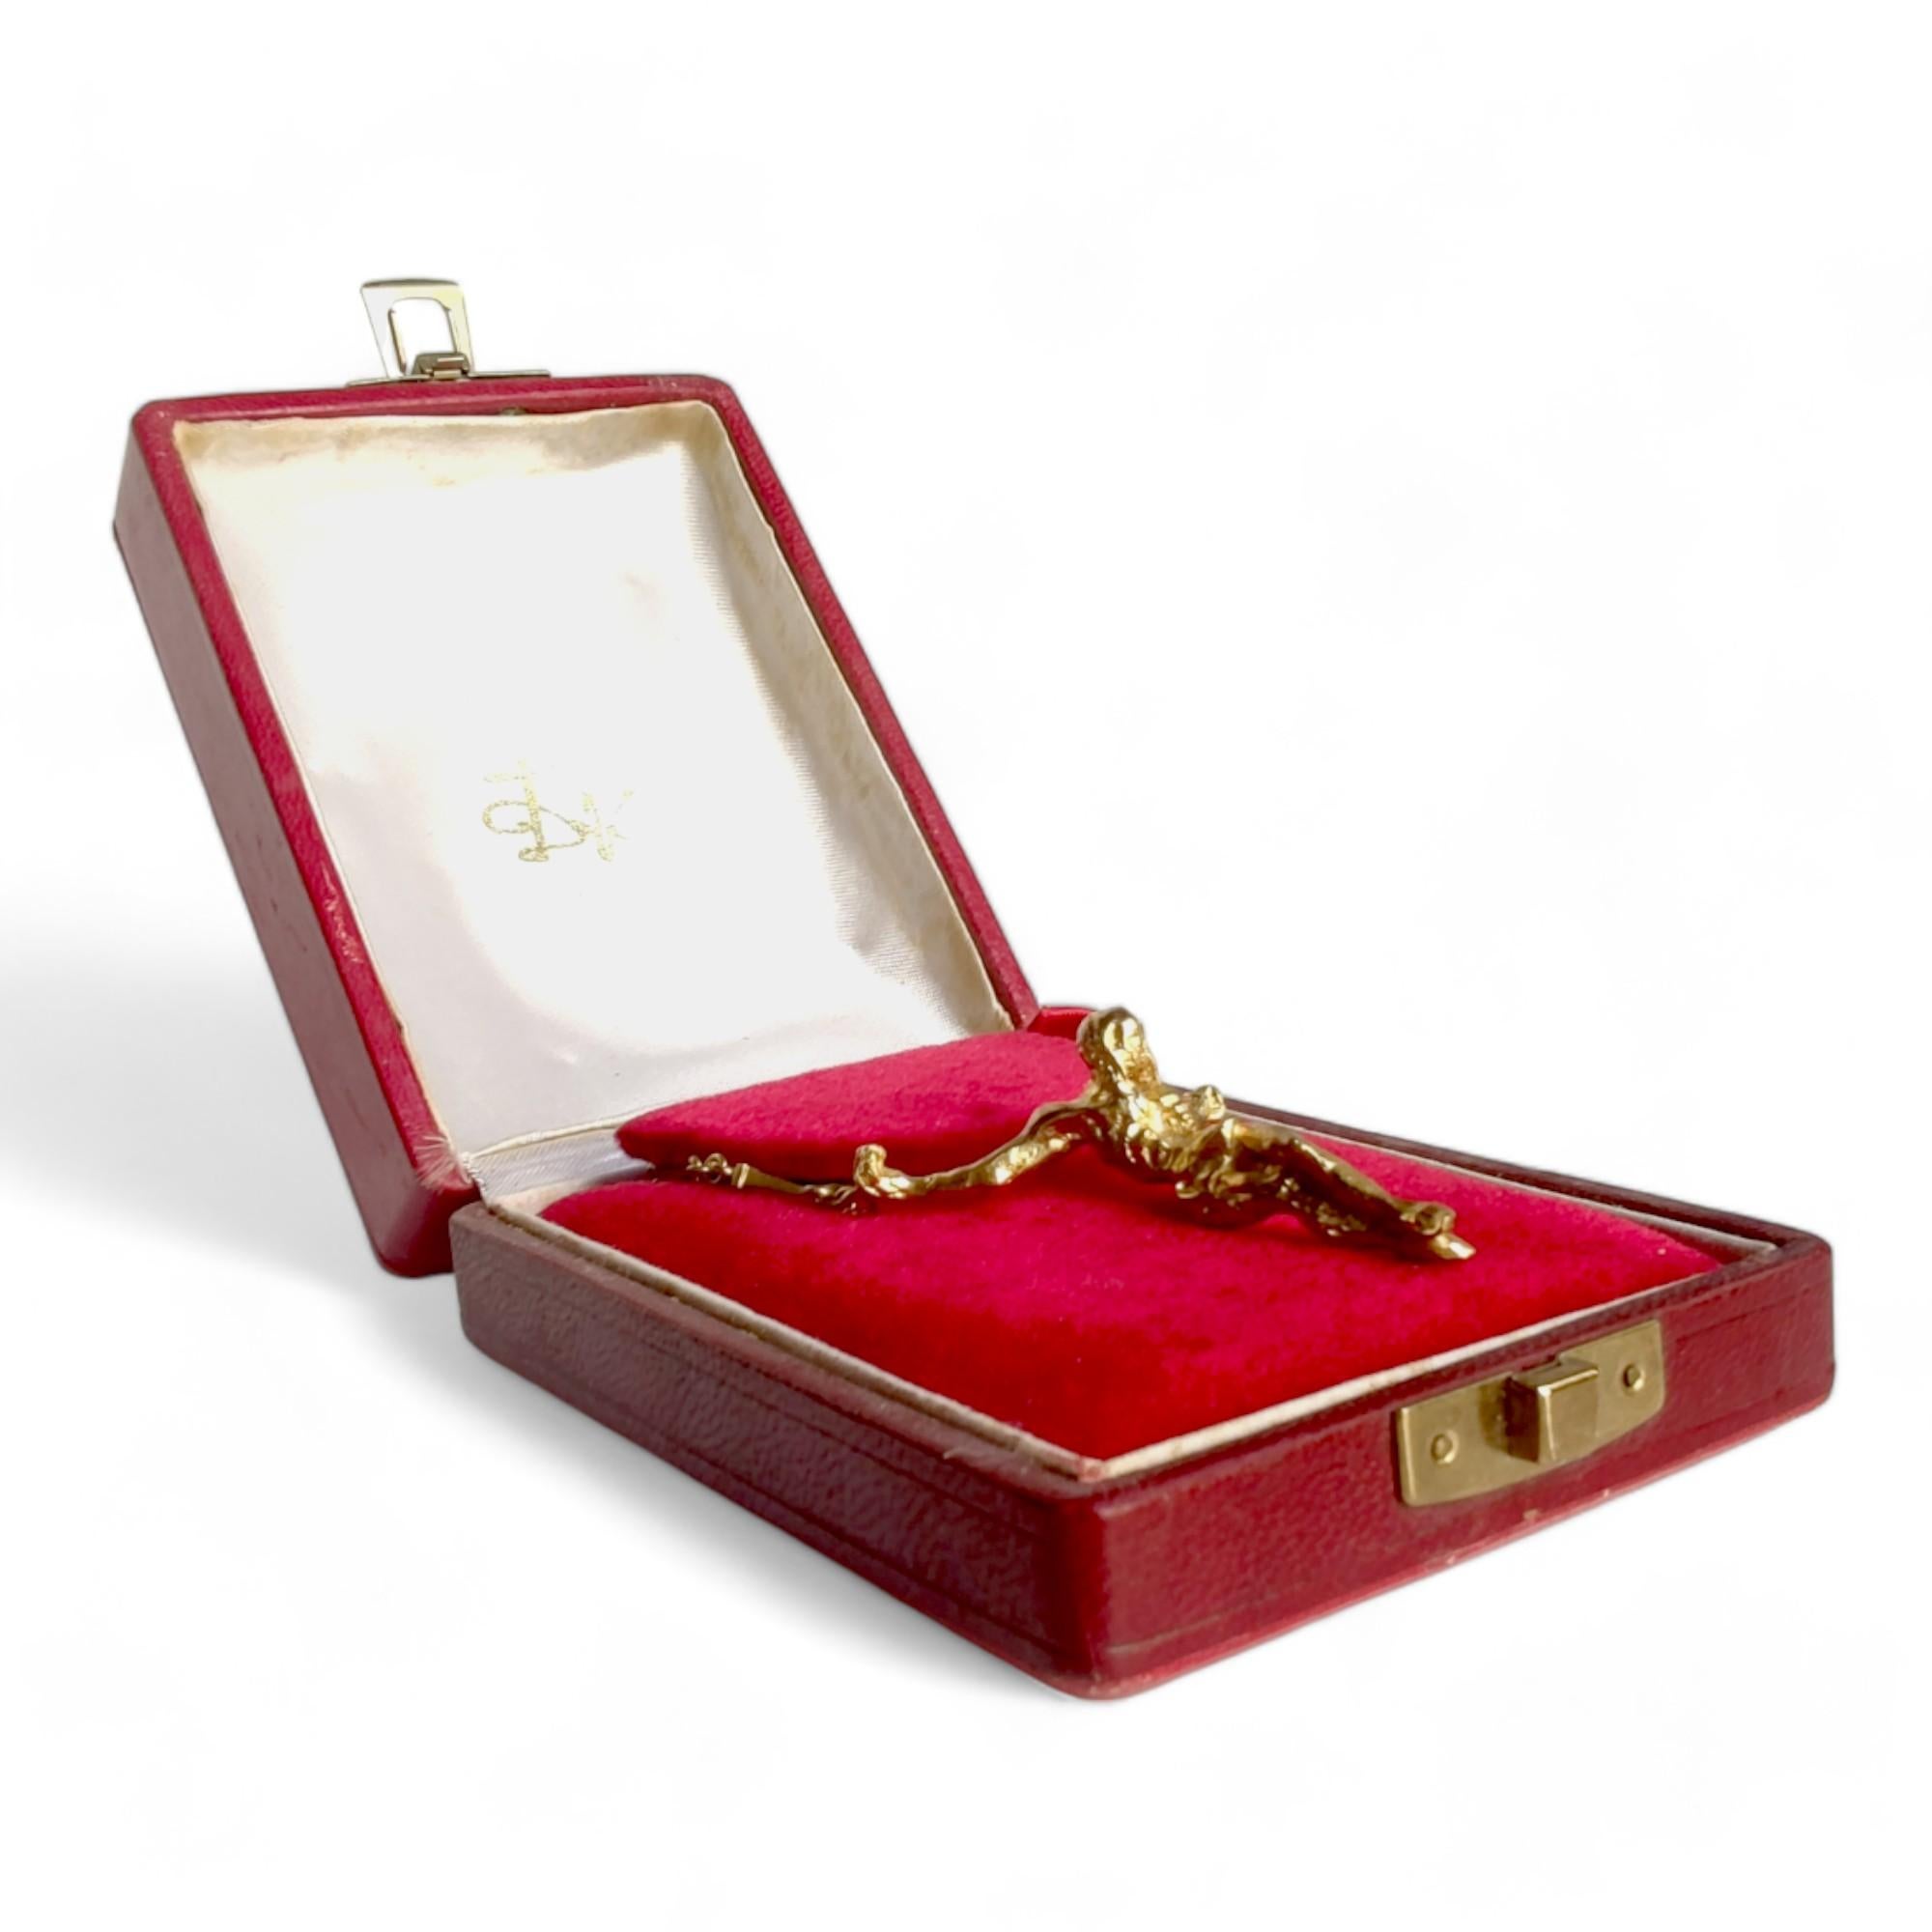 Exclusive Dalí 18K solid gold 'St. John Cross' Necklace #A-821 - With Provenance For Sale 6